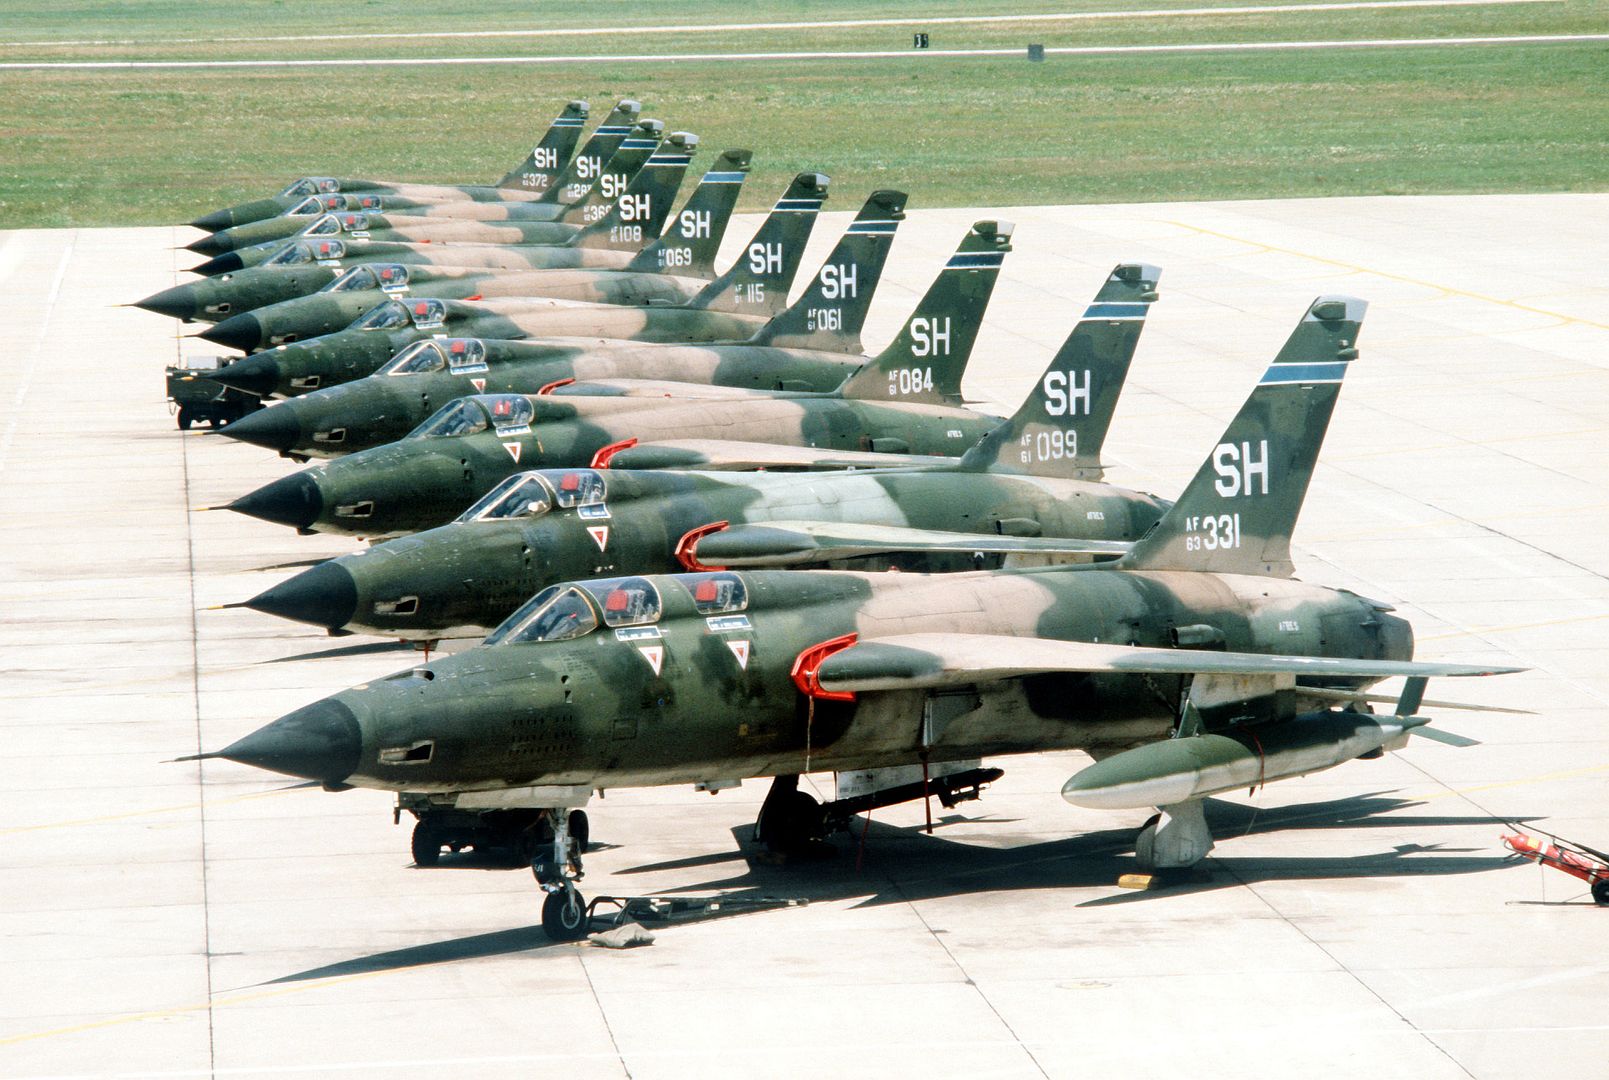 105 Thunderchief Aircraft Parked On The Flight Line